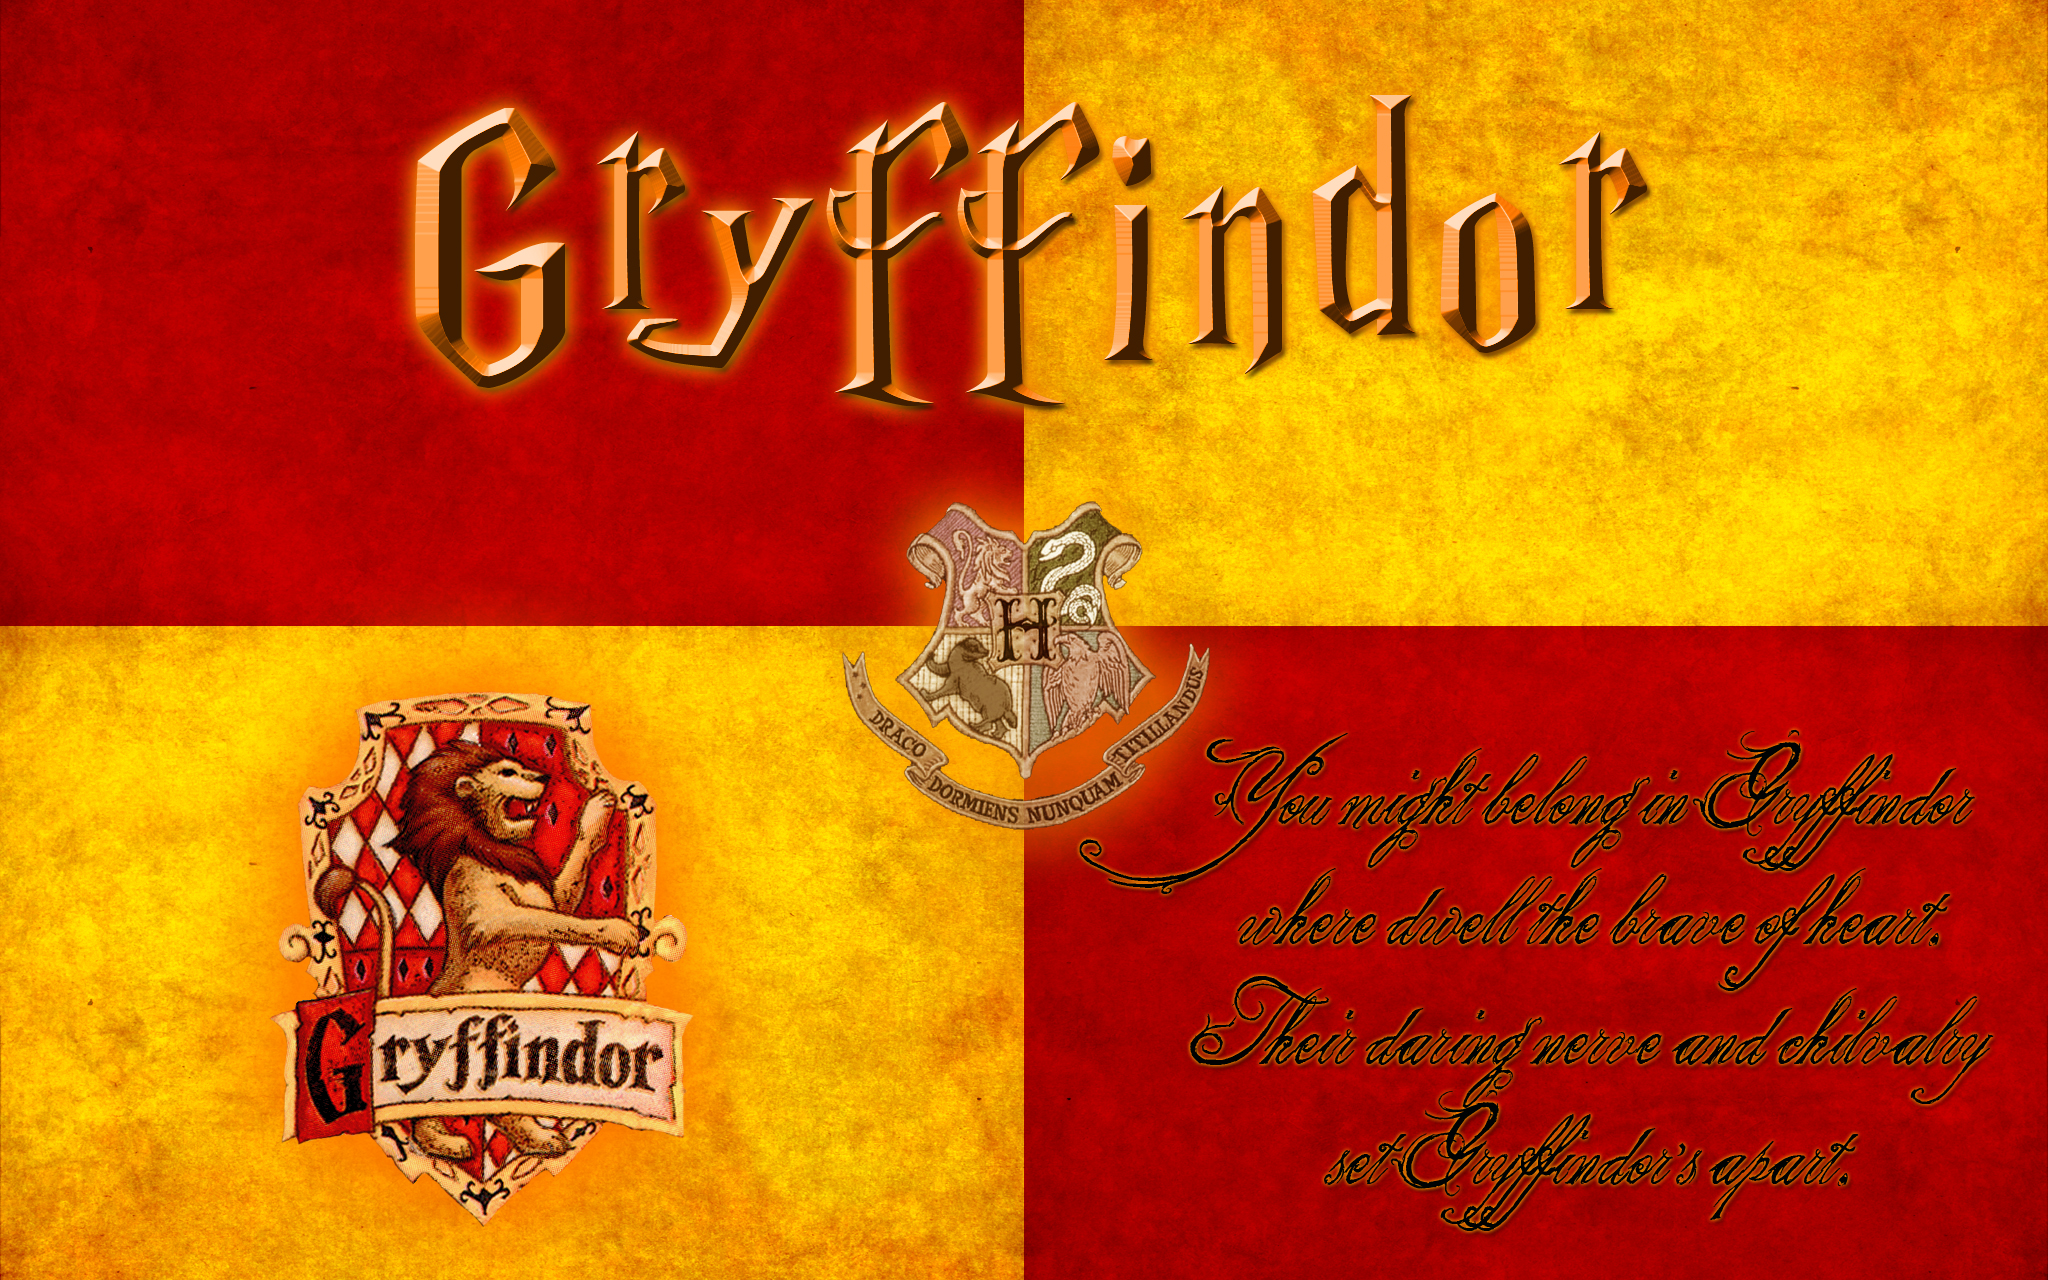  Potter images Gryffindor HD wallpaper and background photos 32294361 2048x1280